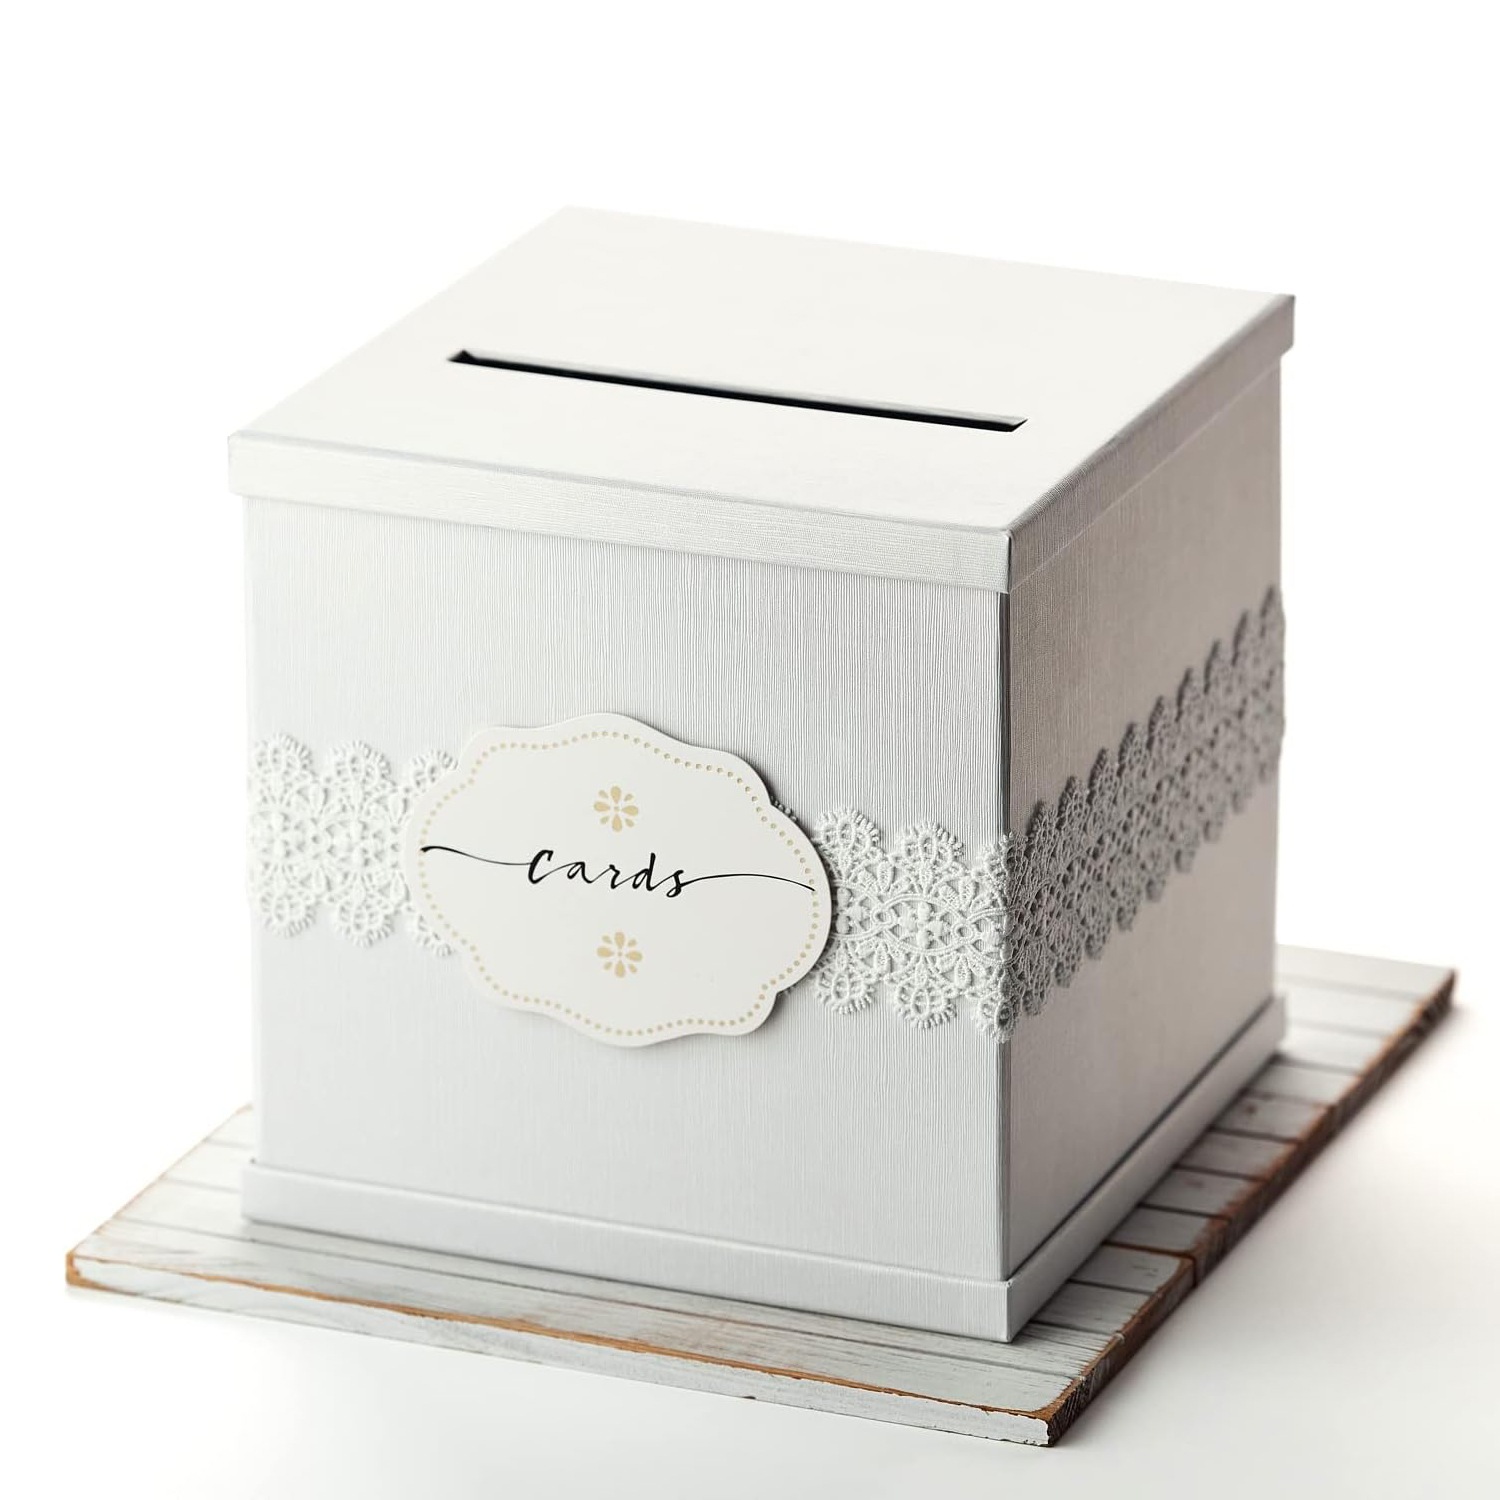 White Gift Card Box with White Lace Textured Finish – Large Size 10″ x 10″